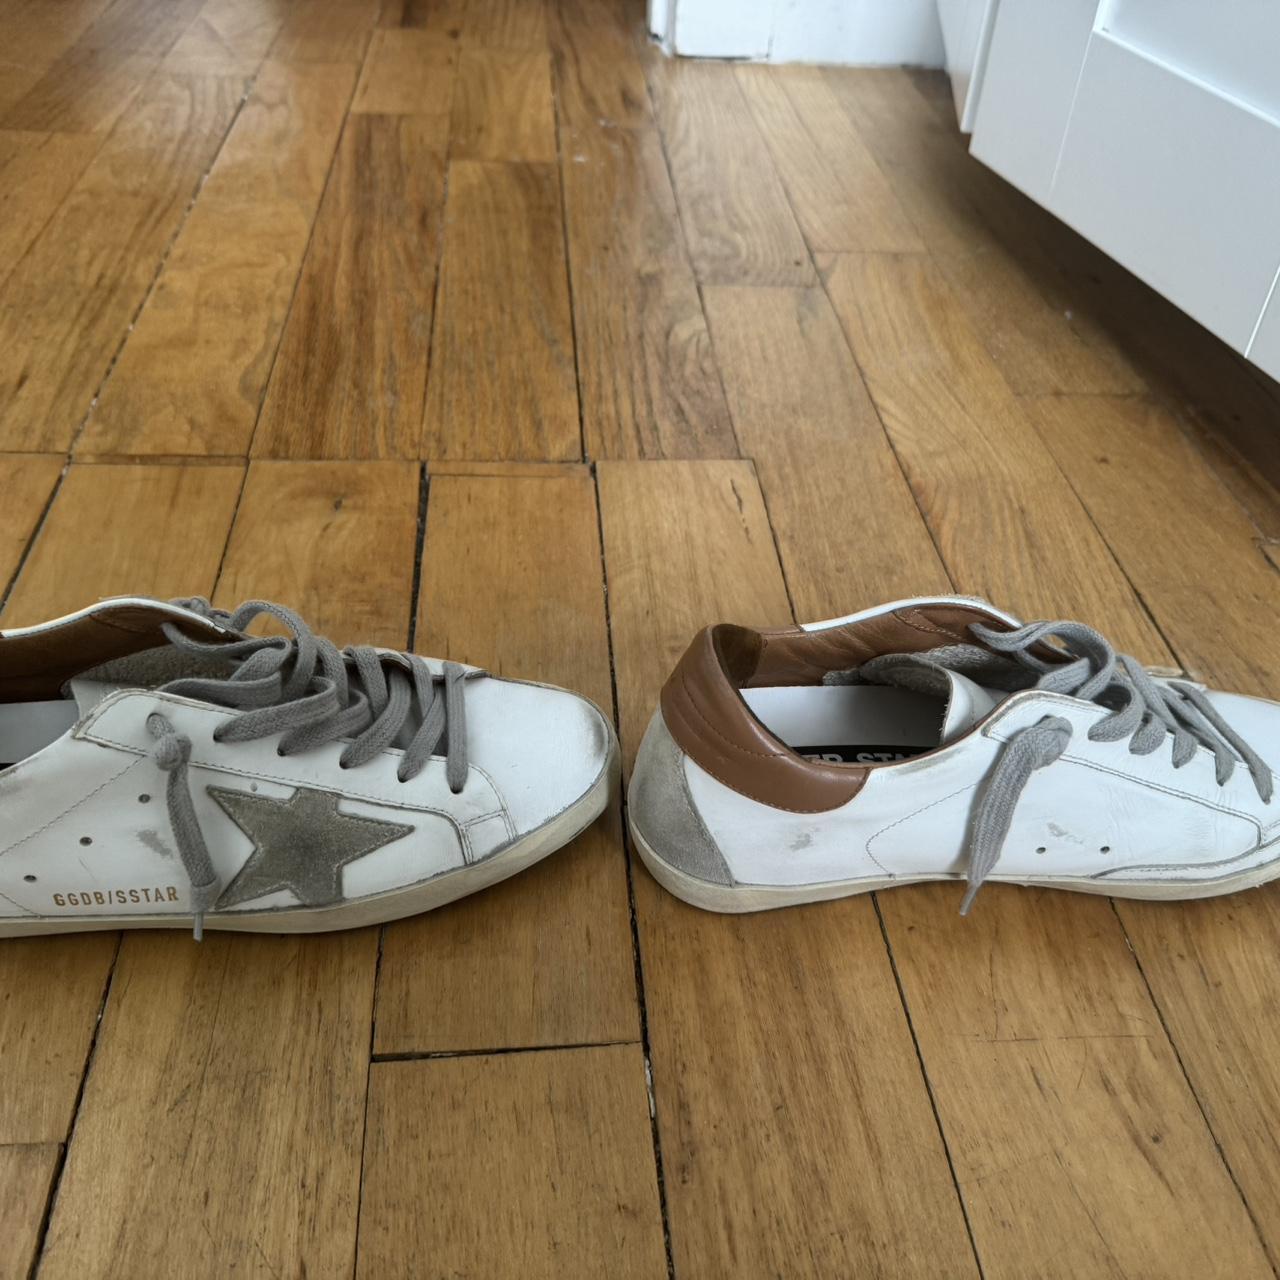 Golden Goose Women's White Trainers (2)